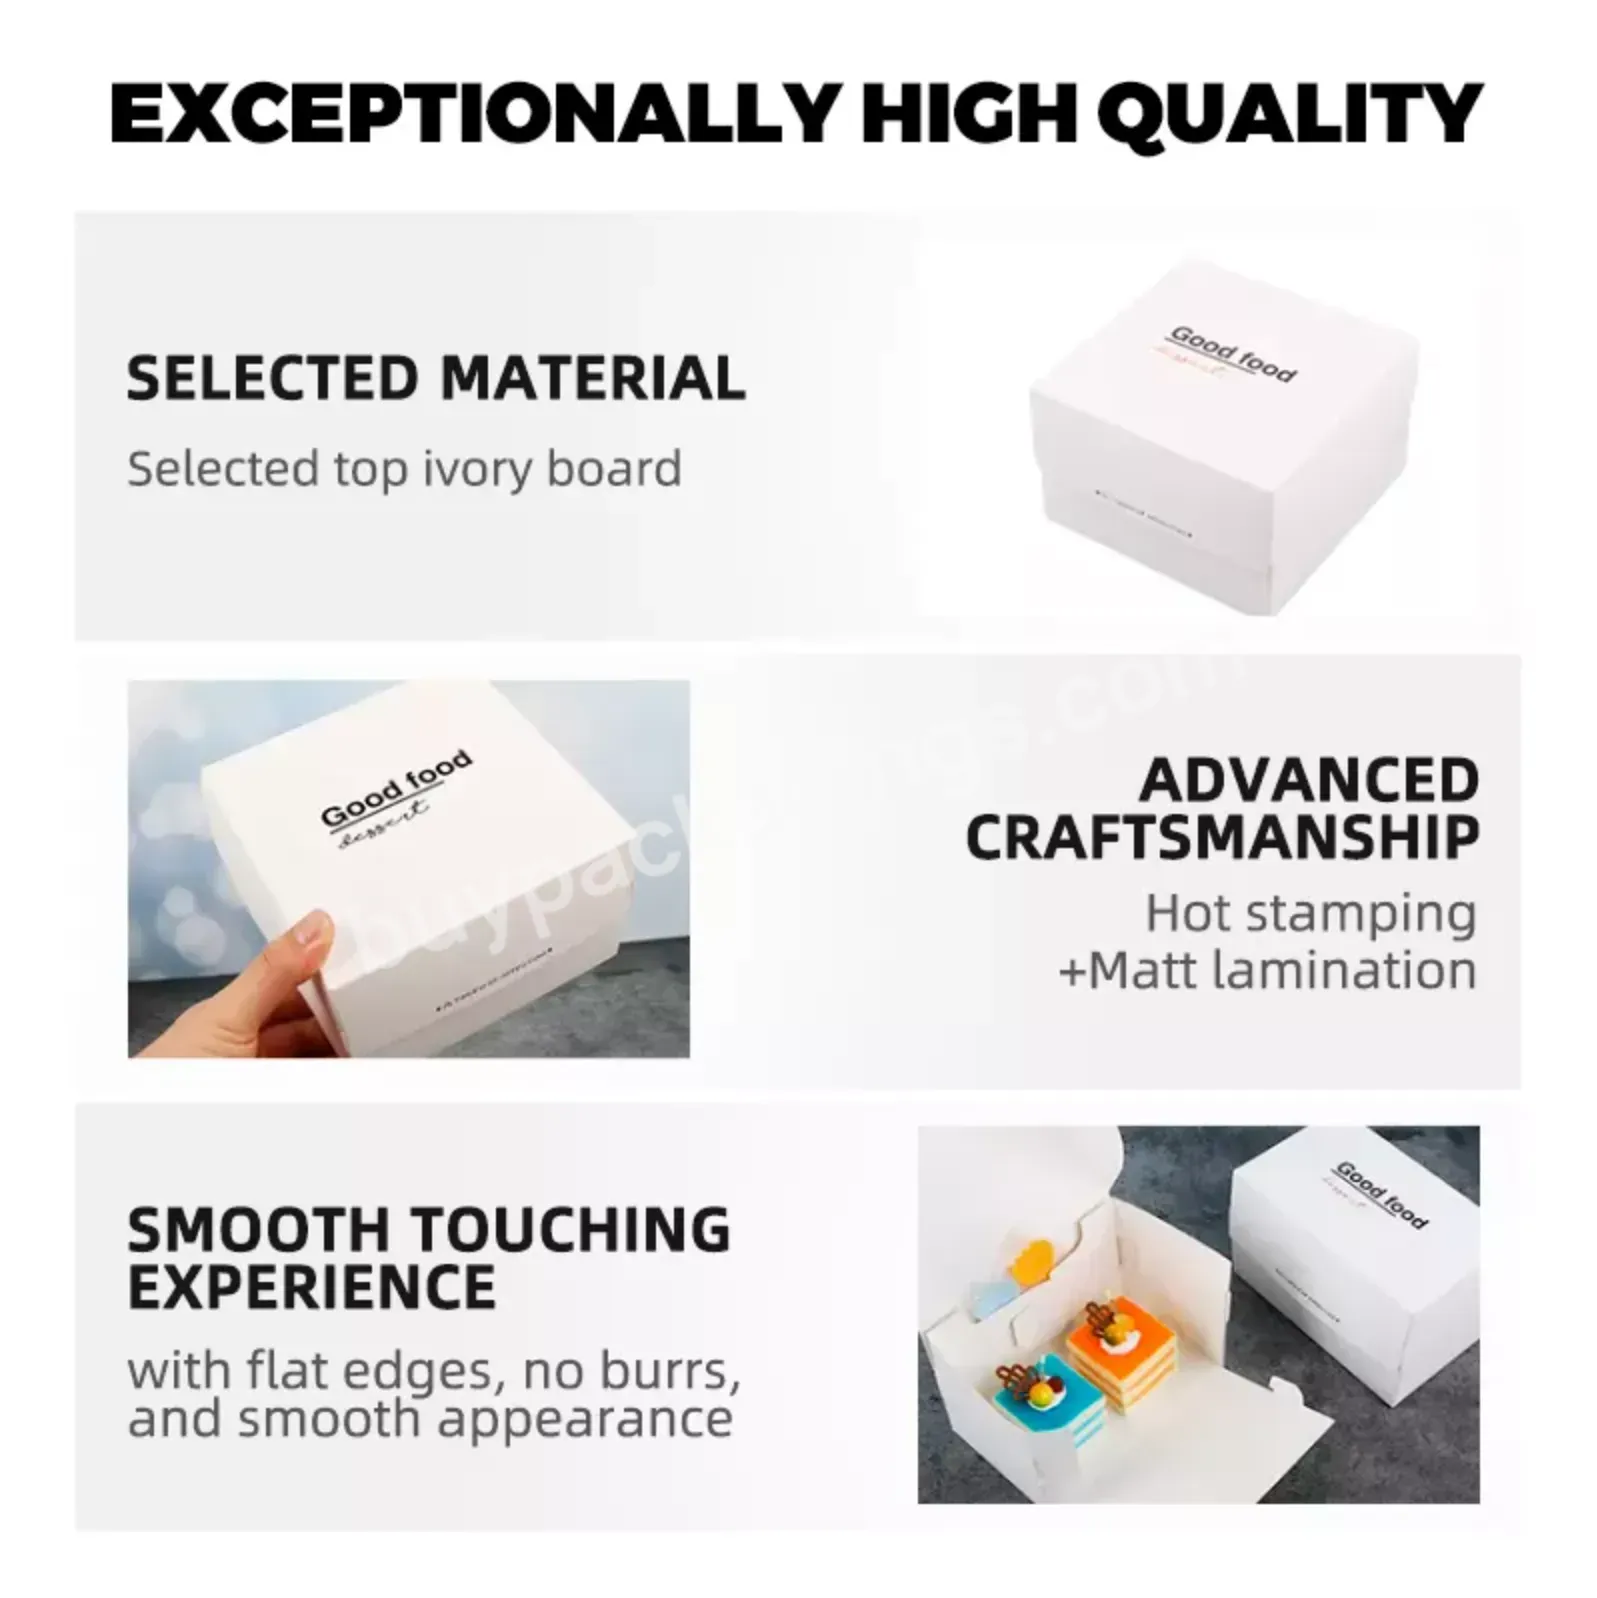 Zeecan Branded Packaging Design Organic Food Box Kraft Gift Boxes With Lid Eco-friendly Cake Box